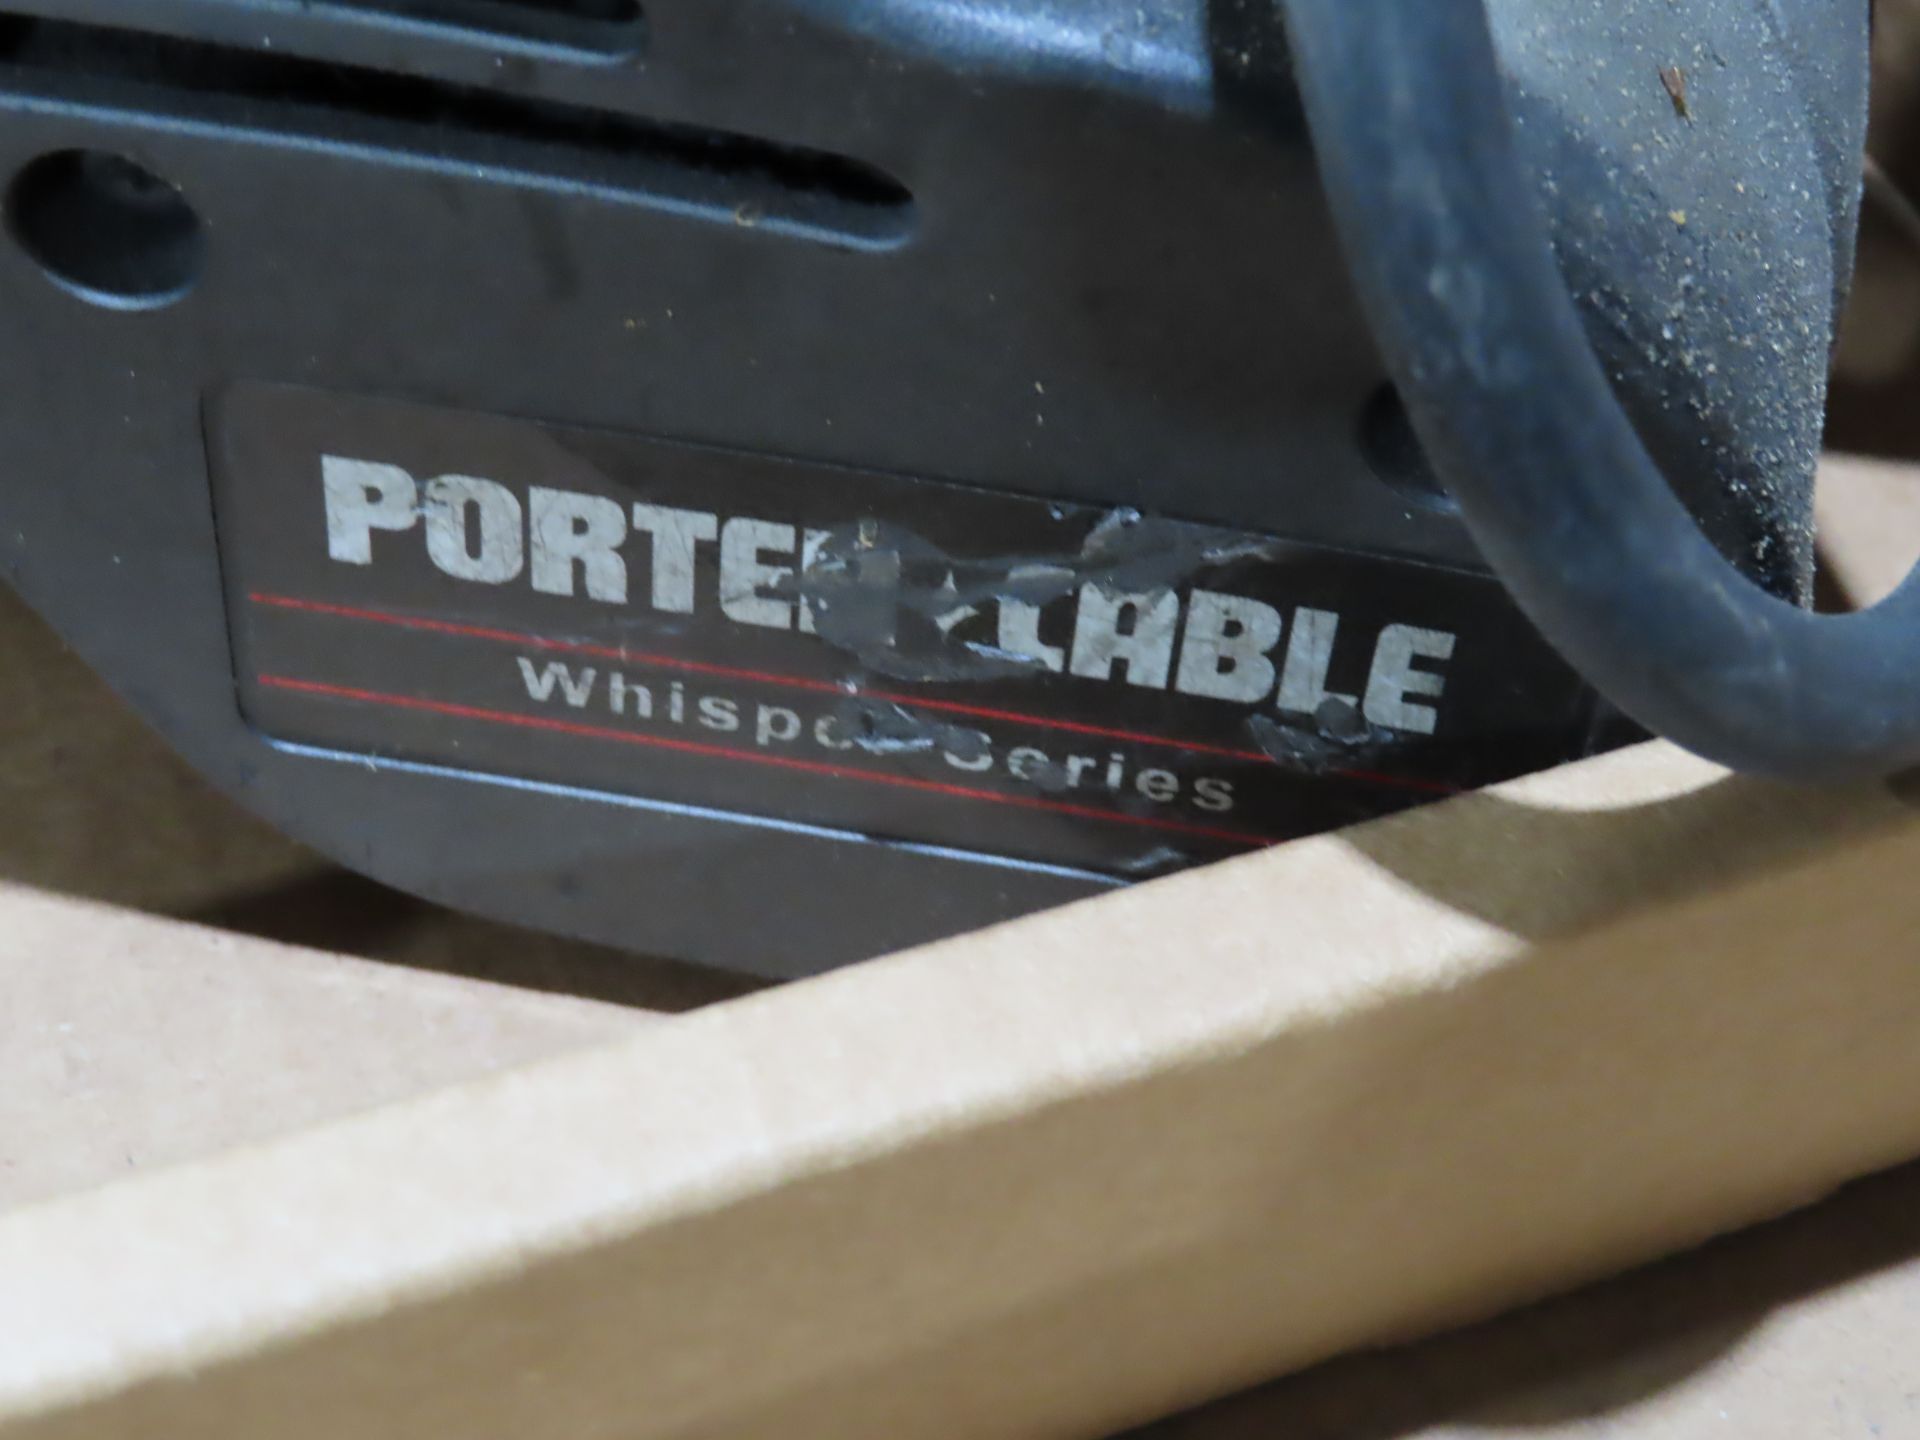 Porter Cable whisper series belt sander, used, as always with Brolyn LLC auctions, all lots can be - Image 2 of 2